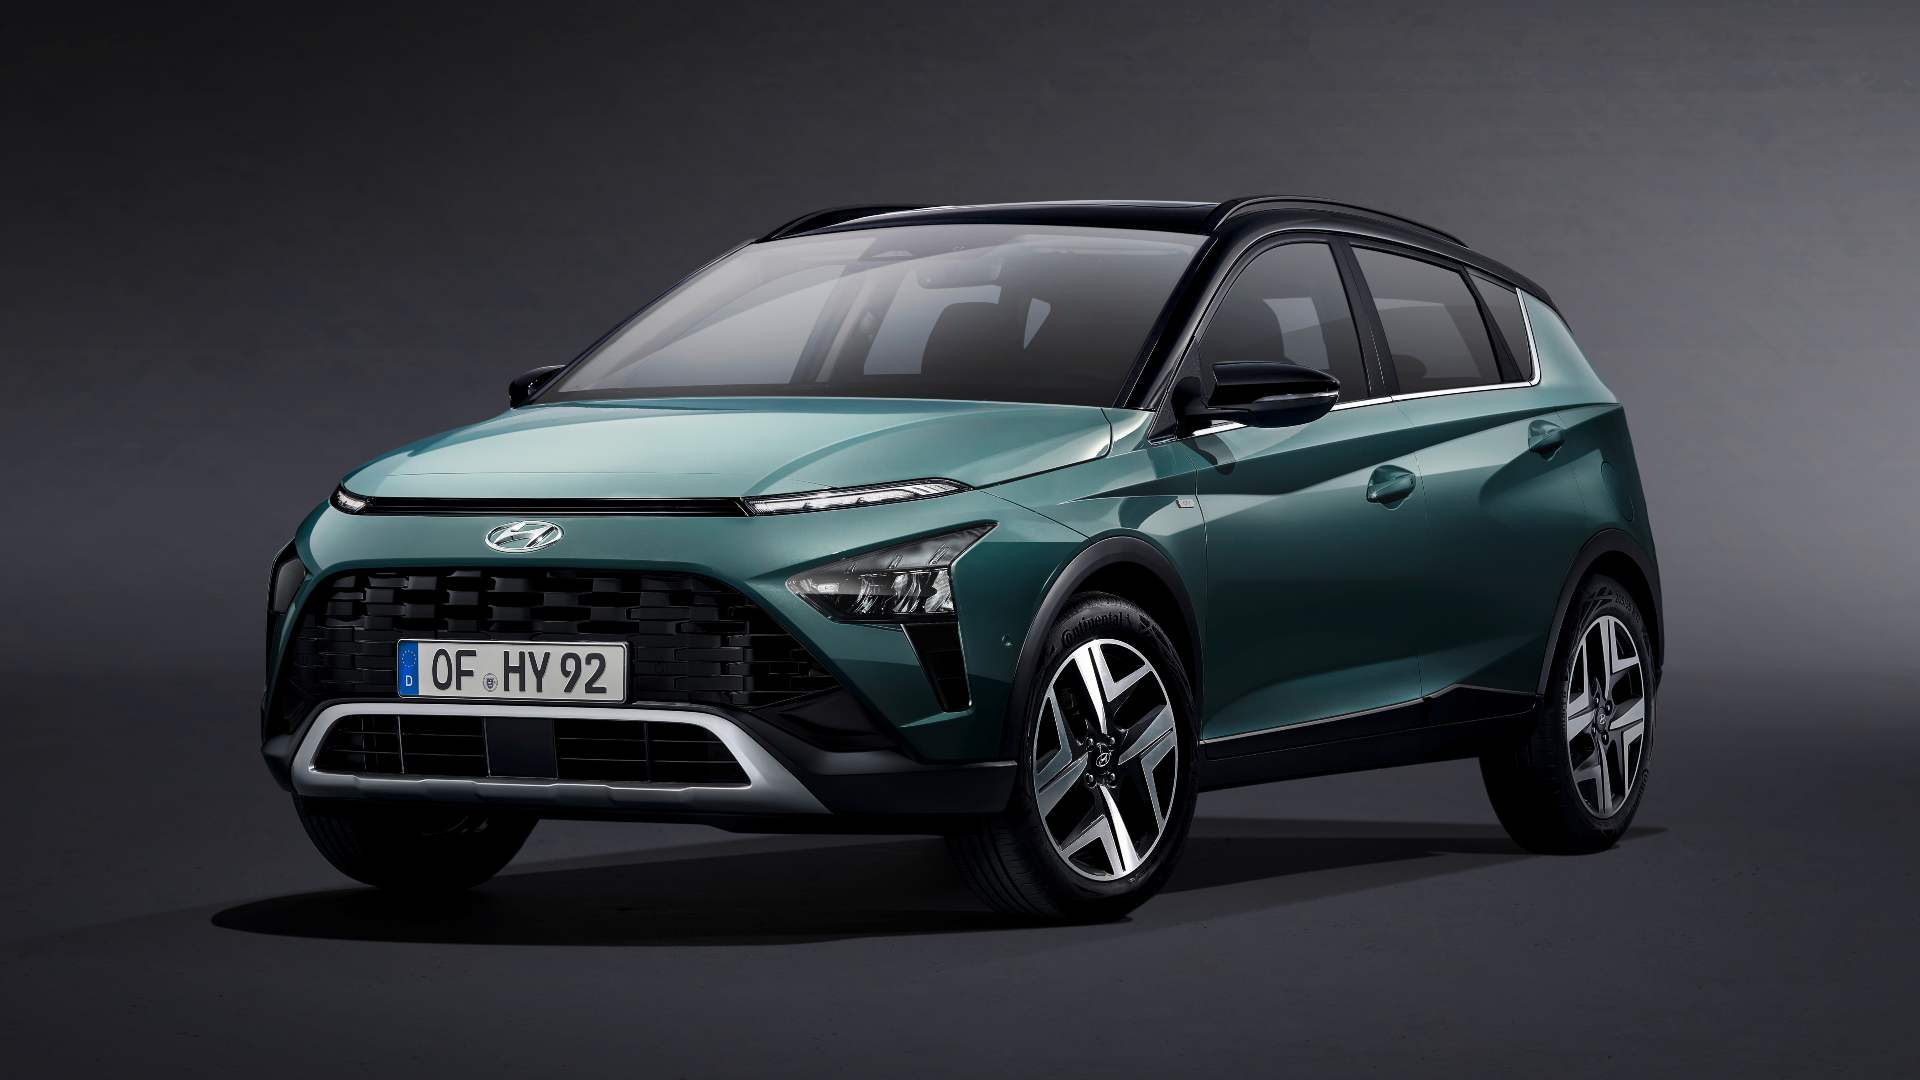  Hyundai Bayon is a small crossover for Europe based on the new-gen i20